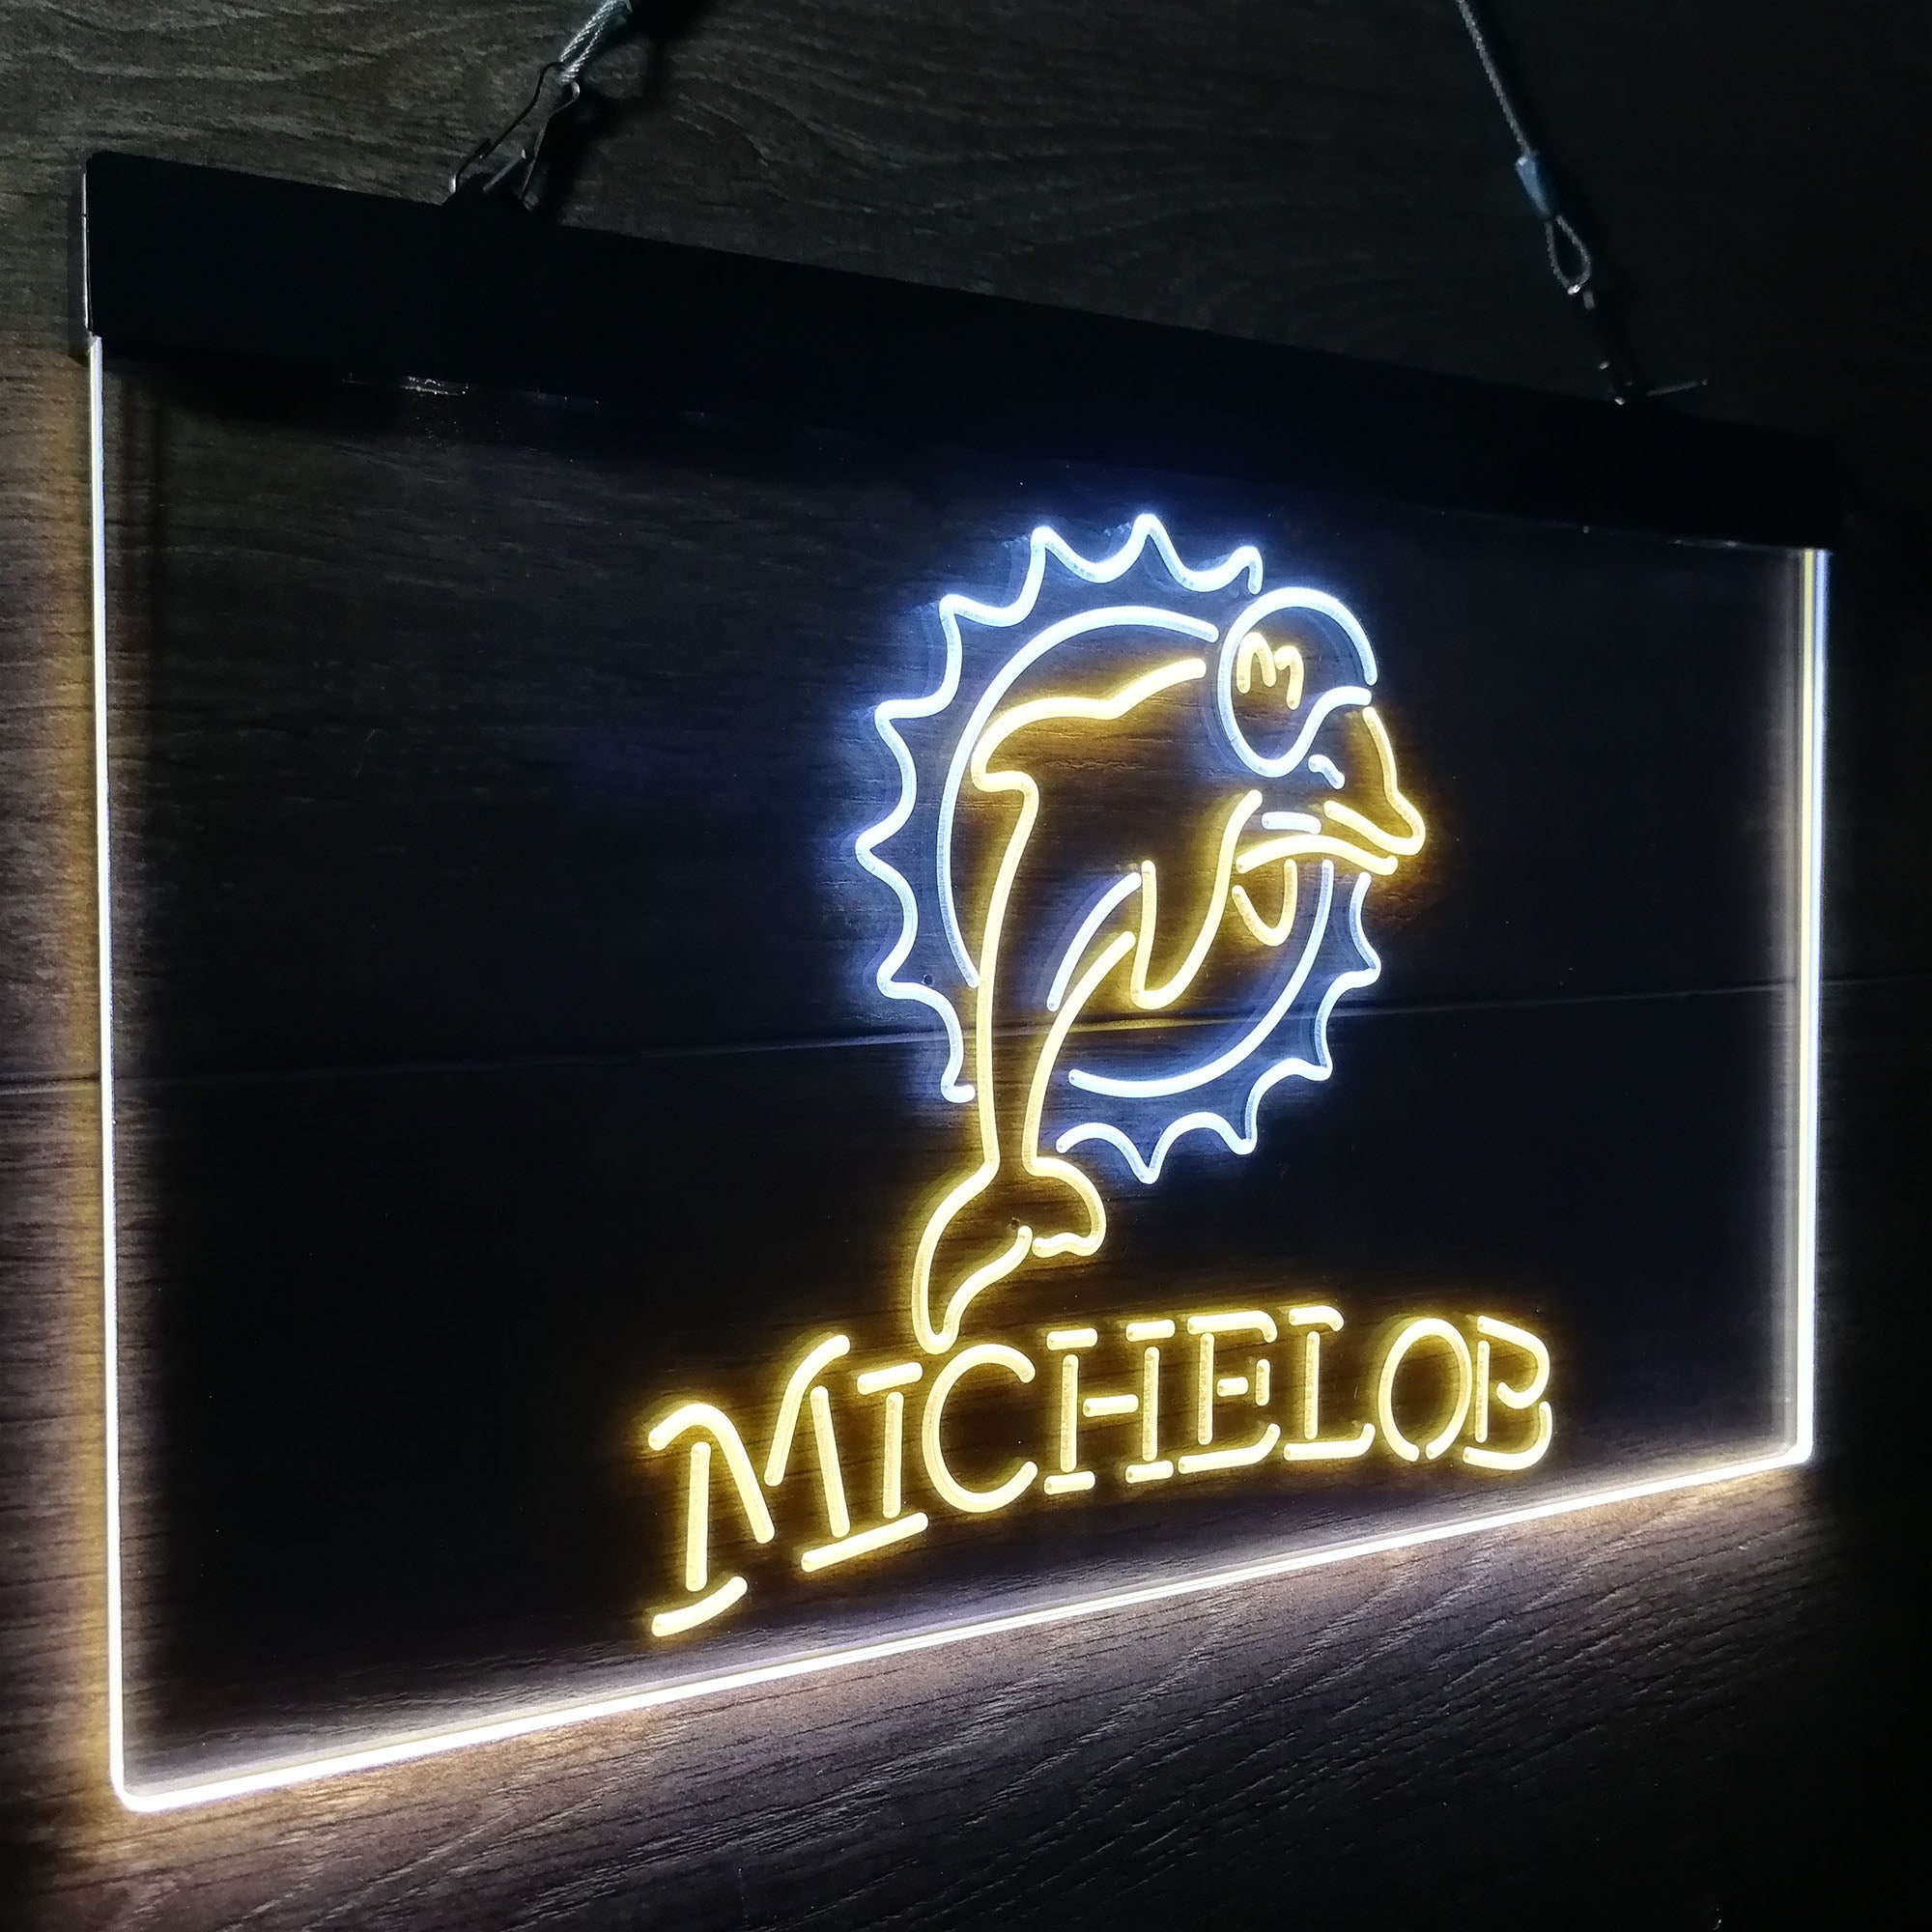 Michelob Bar Miami Dolphins Est. 1966 Neon-Like LED Sign